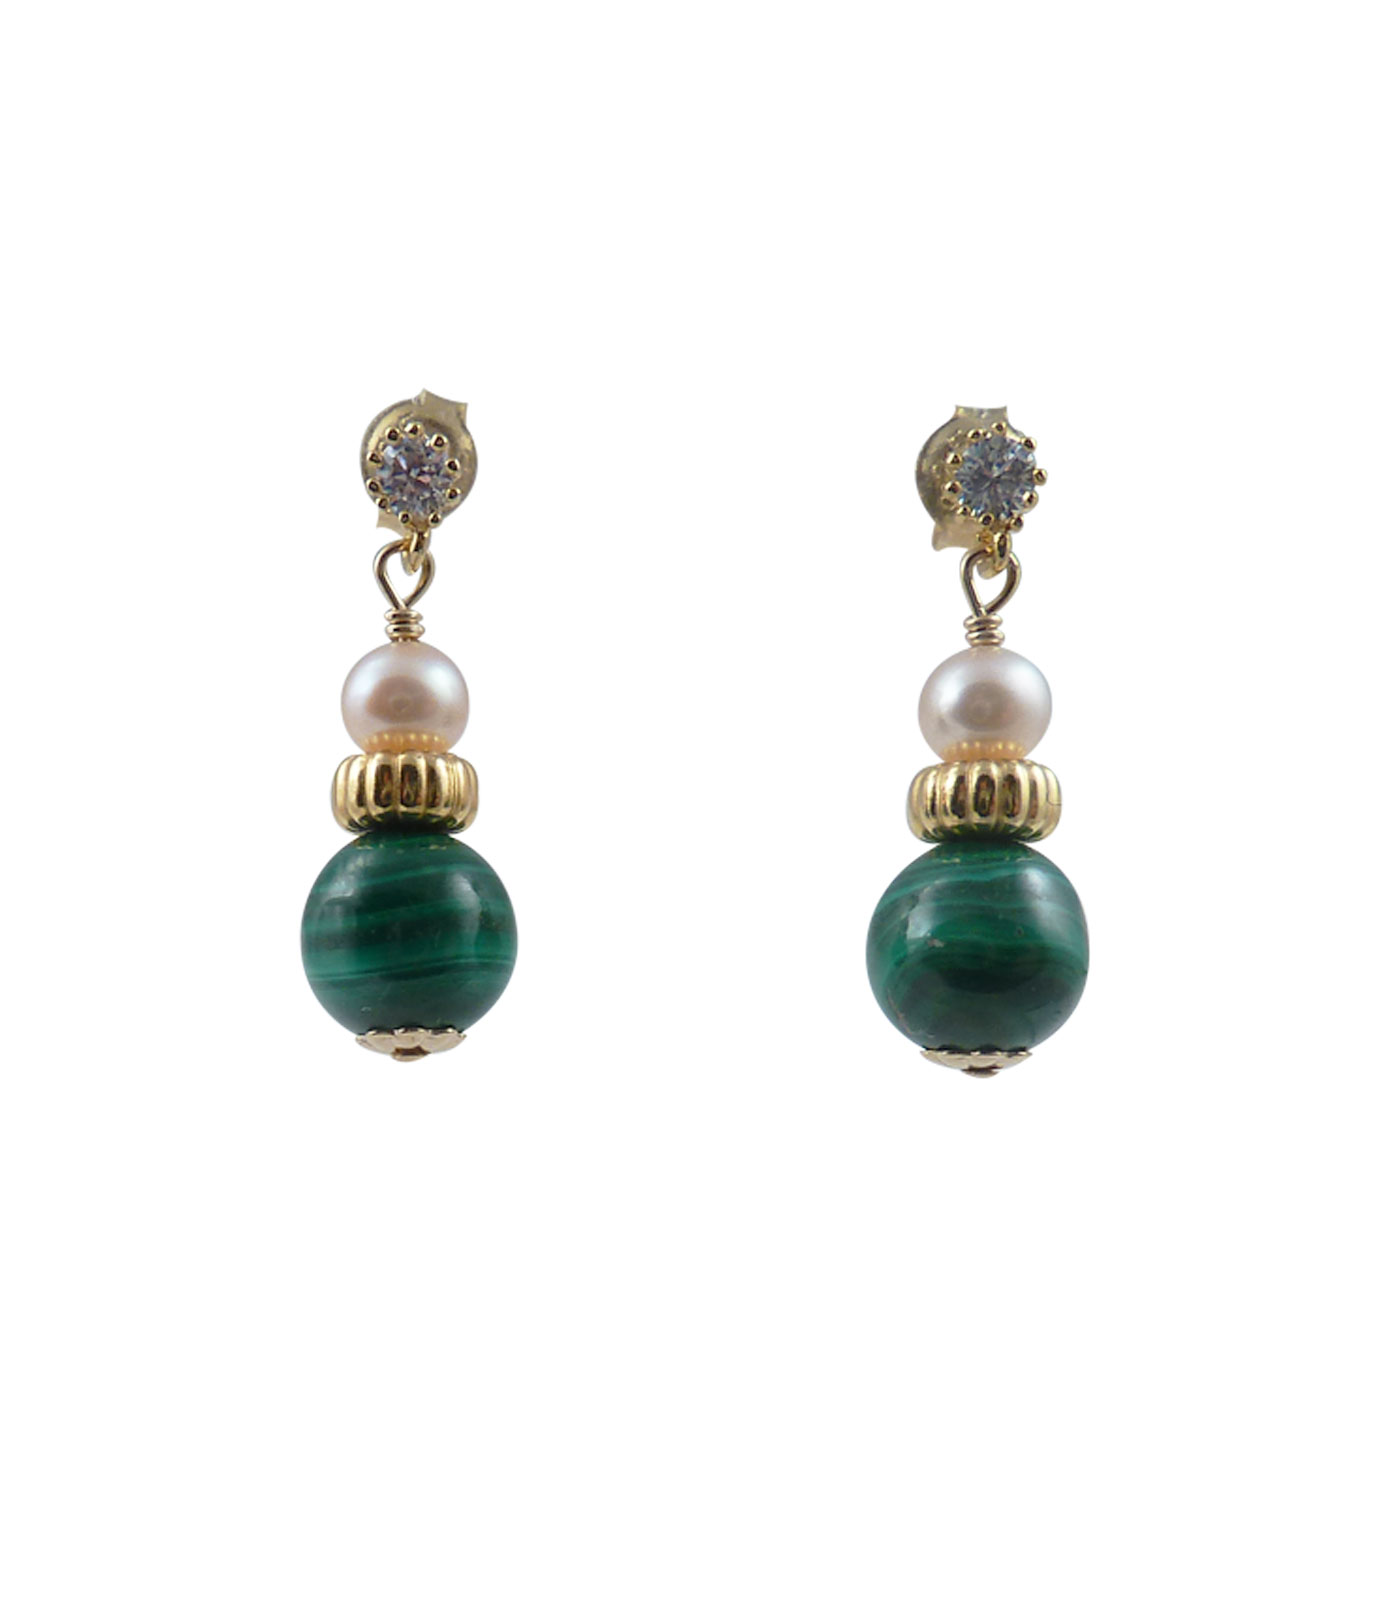 Malachite earrings pearls featuring lovely green malachite and pink pearls